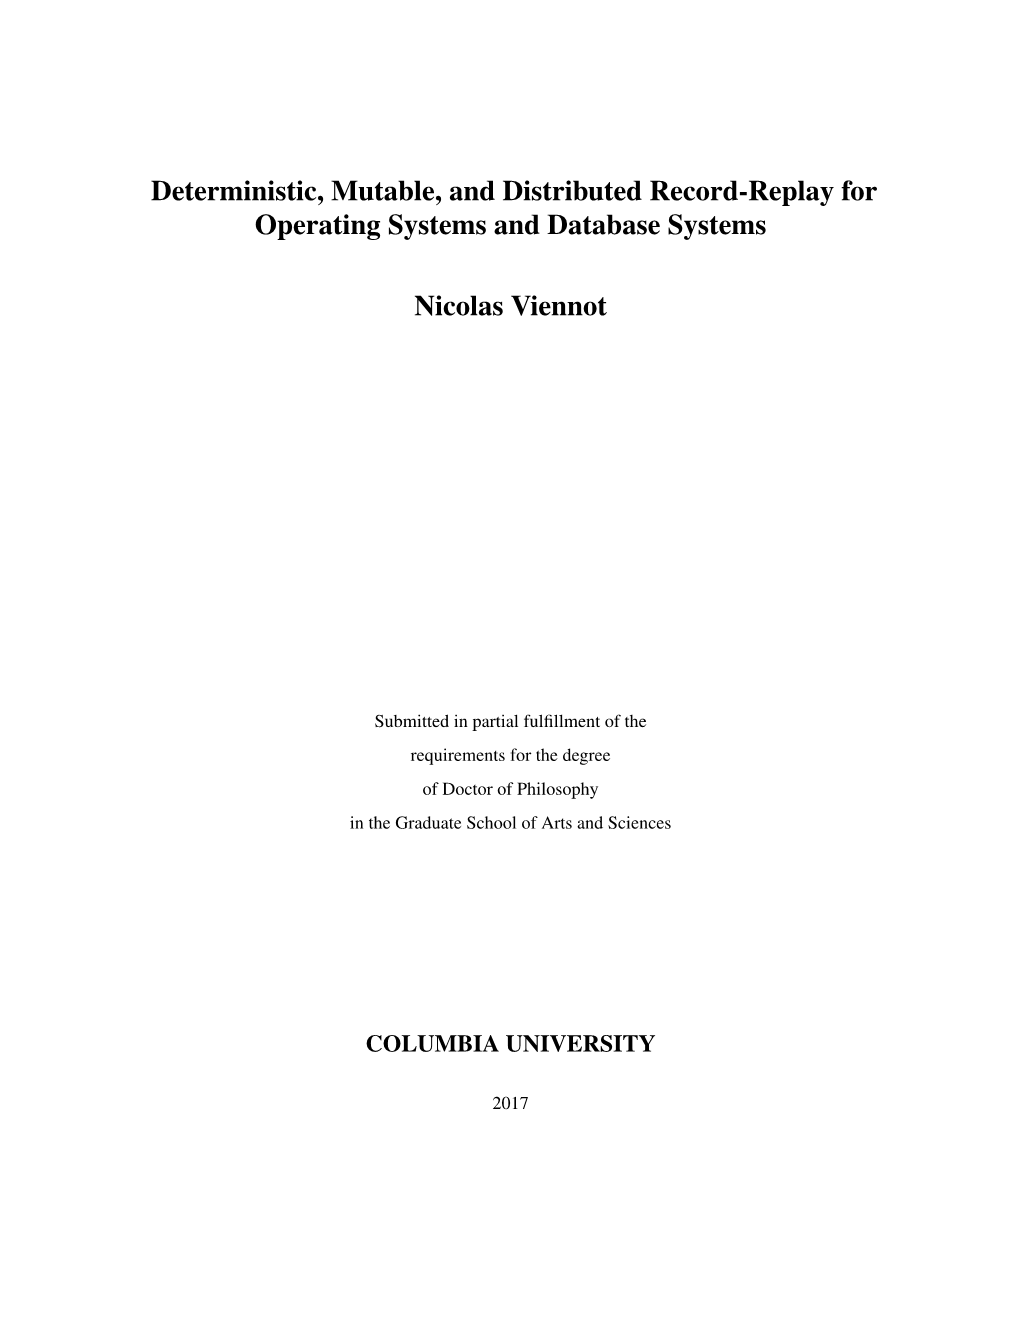 Deterministic, Mutable, and Distributed Record-Replay for Operating Systems and Database Systems